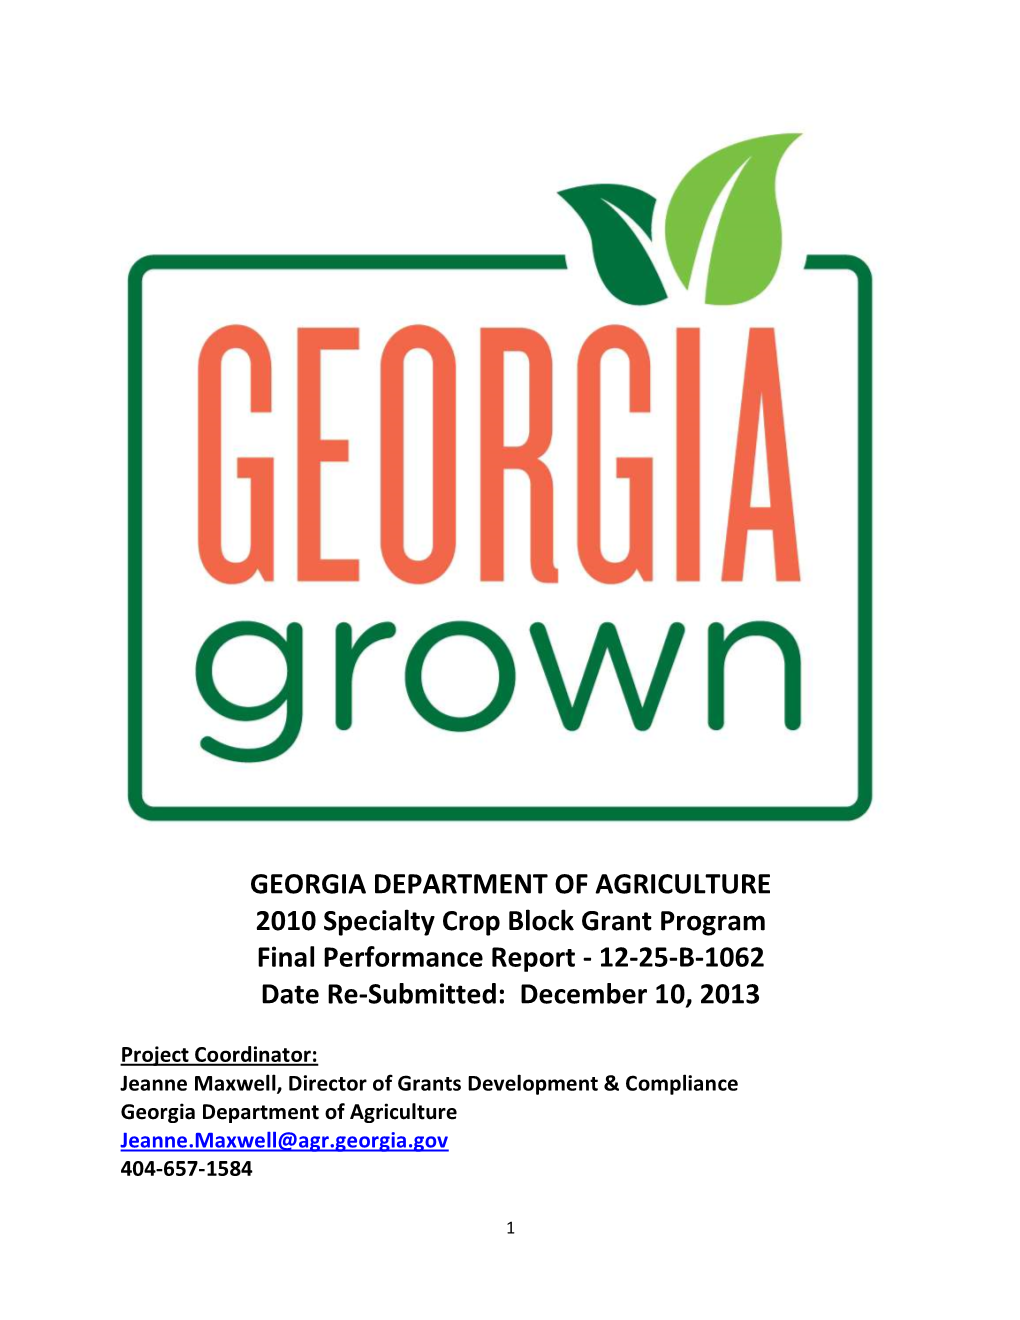 GEORGIA DEPARTMENT of AGRICULTURE 2010 Specialty Crop Block Grant Program Final Performance Report - 12-25-B-1062 Date Re-Submitted: December 10, 2013